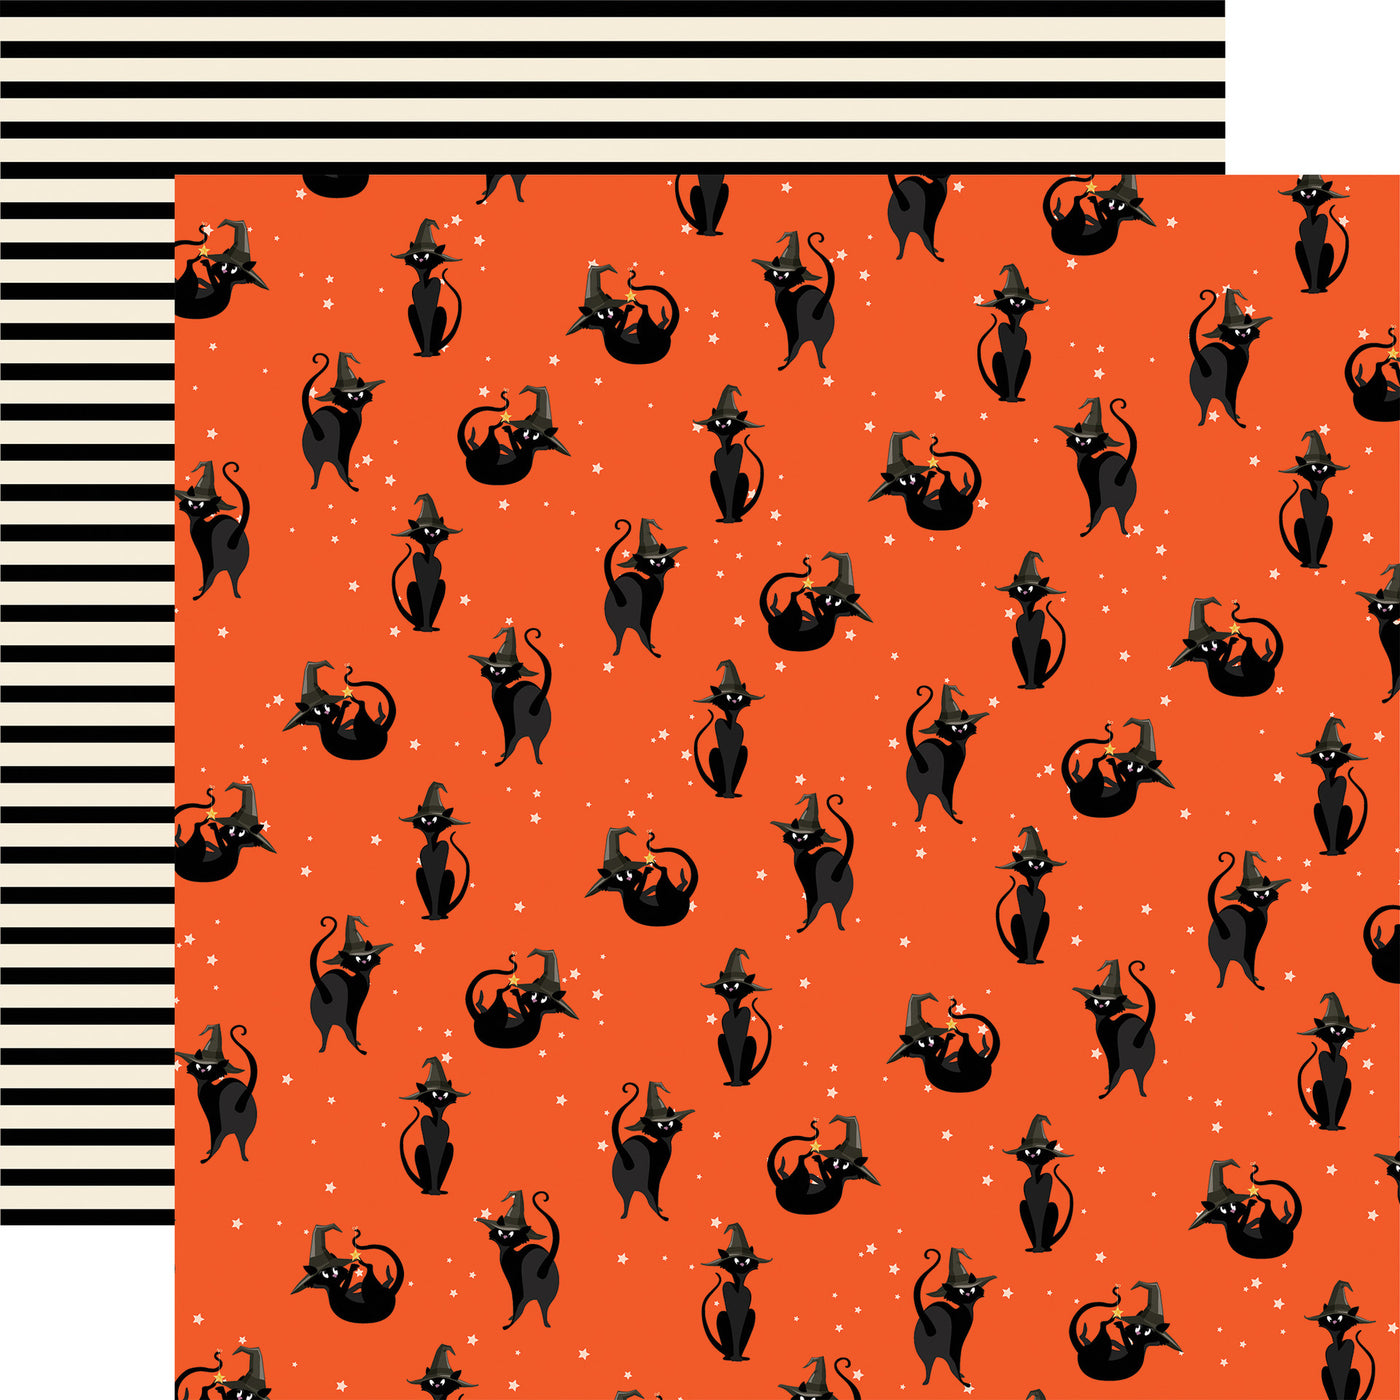 (Side A - black cats on an orange background, and Side B - black stripes on a cream background)